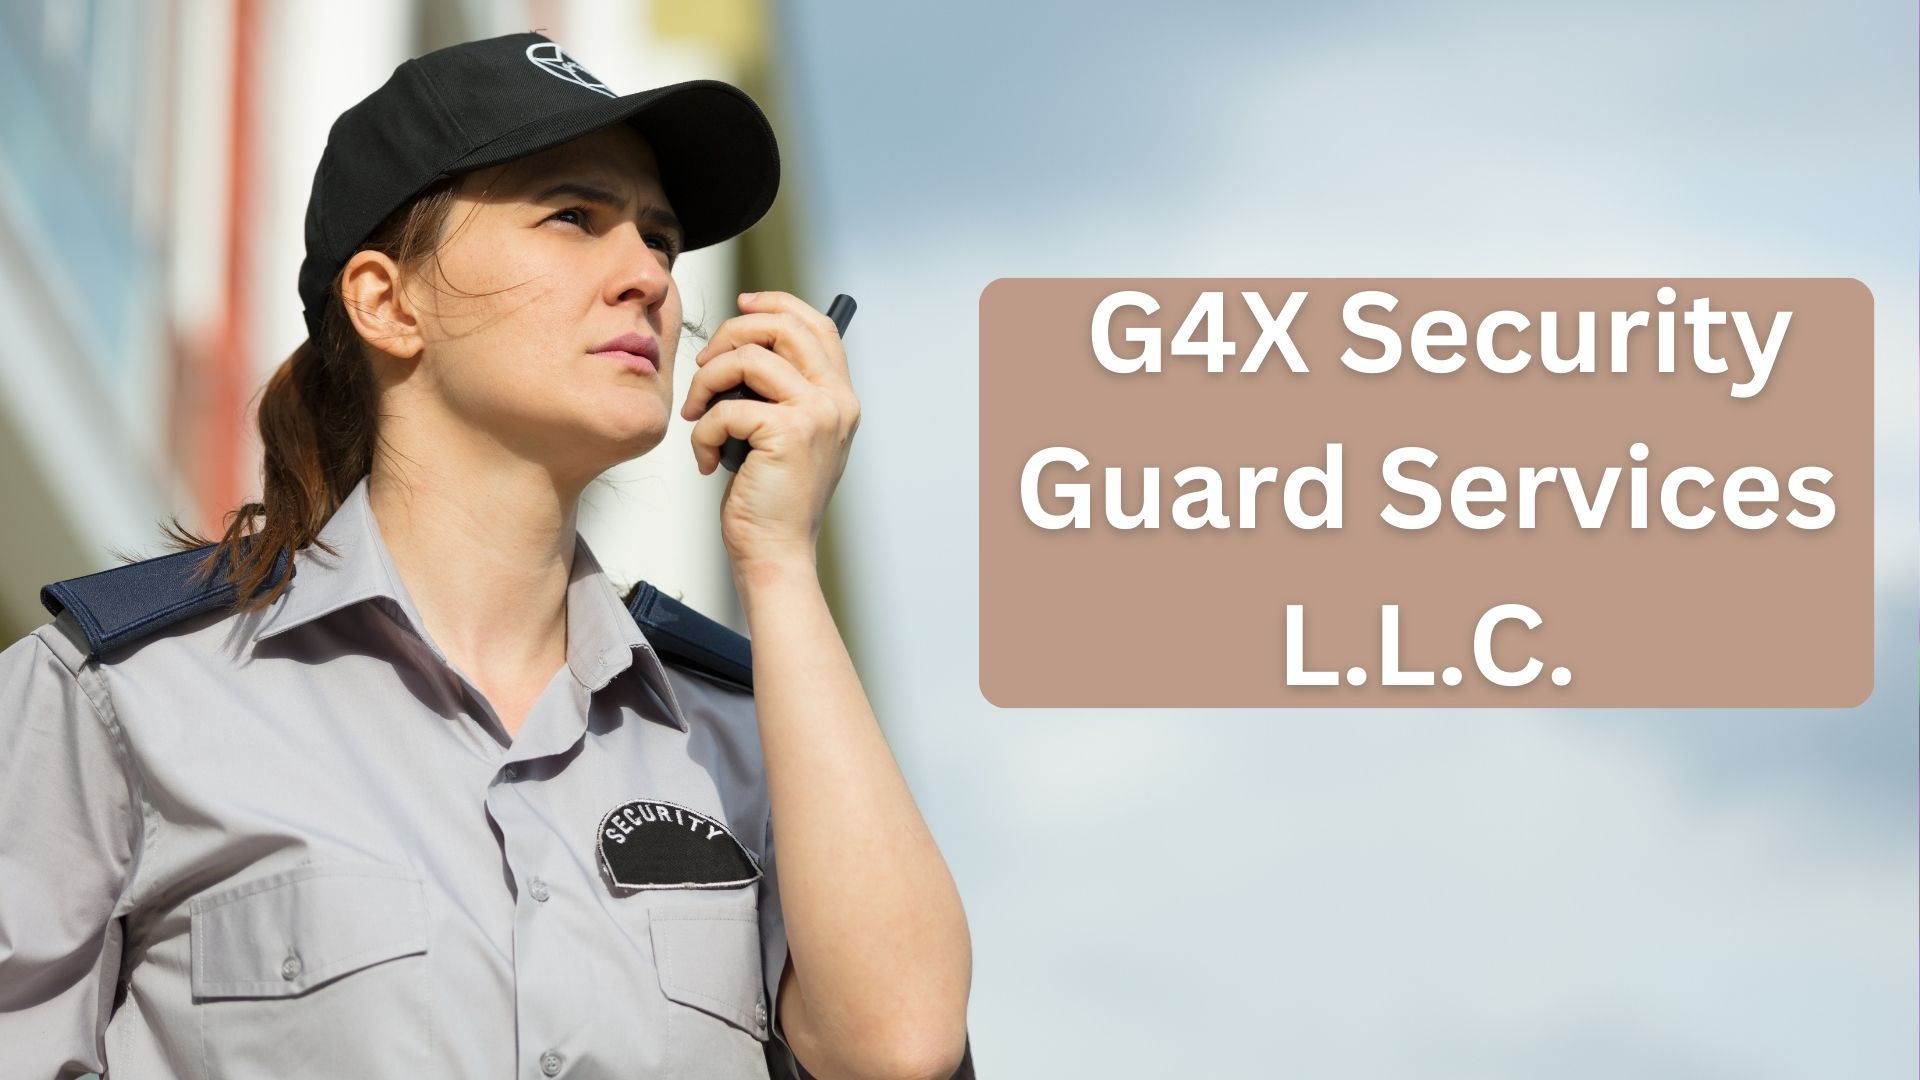 Exploring Career Opportunities with G4X Security Guard Services L.L.C.